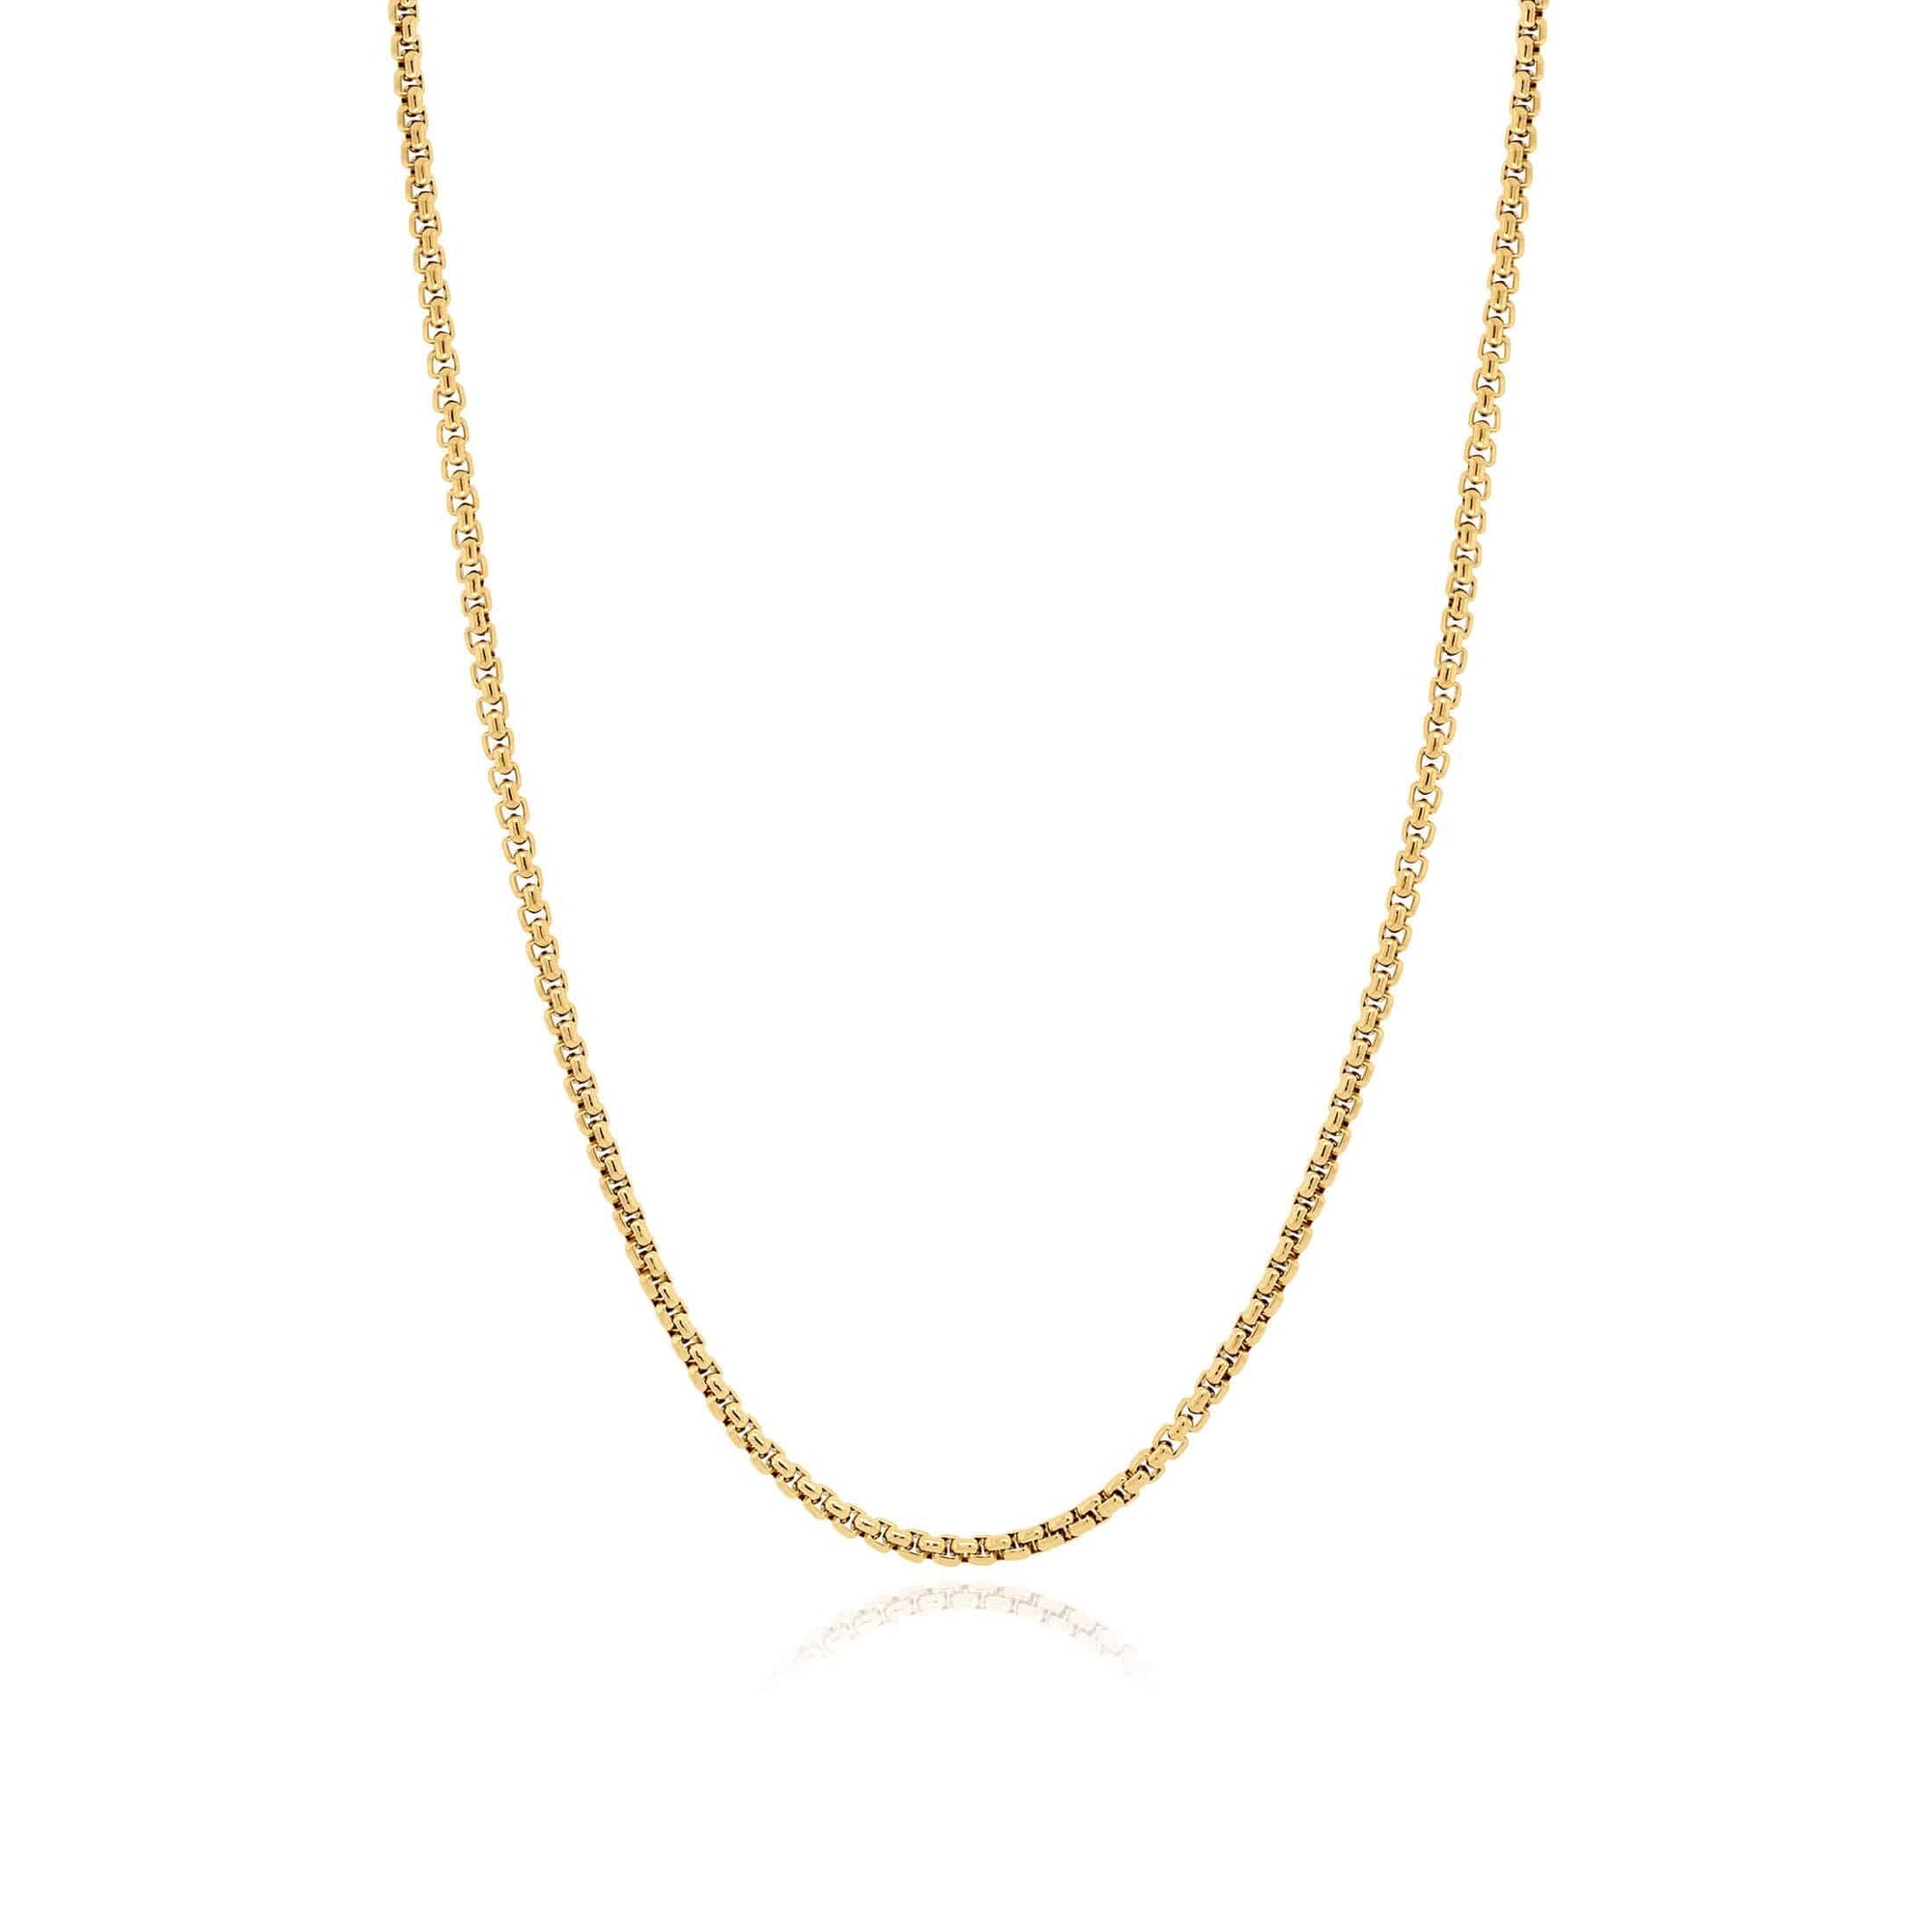 ROUNDED BOX CHAIN - Trove & Co.